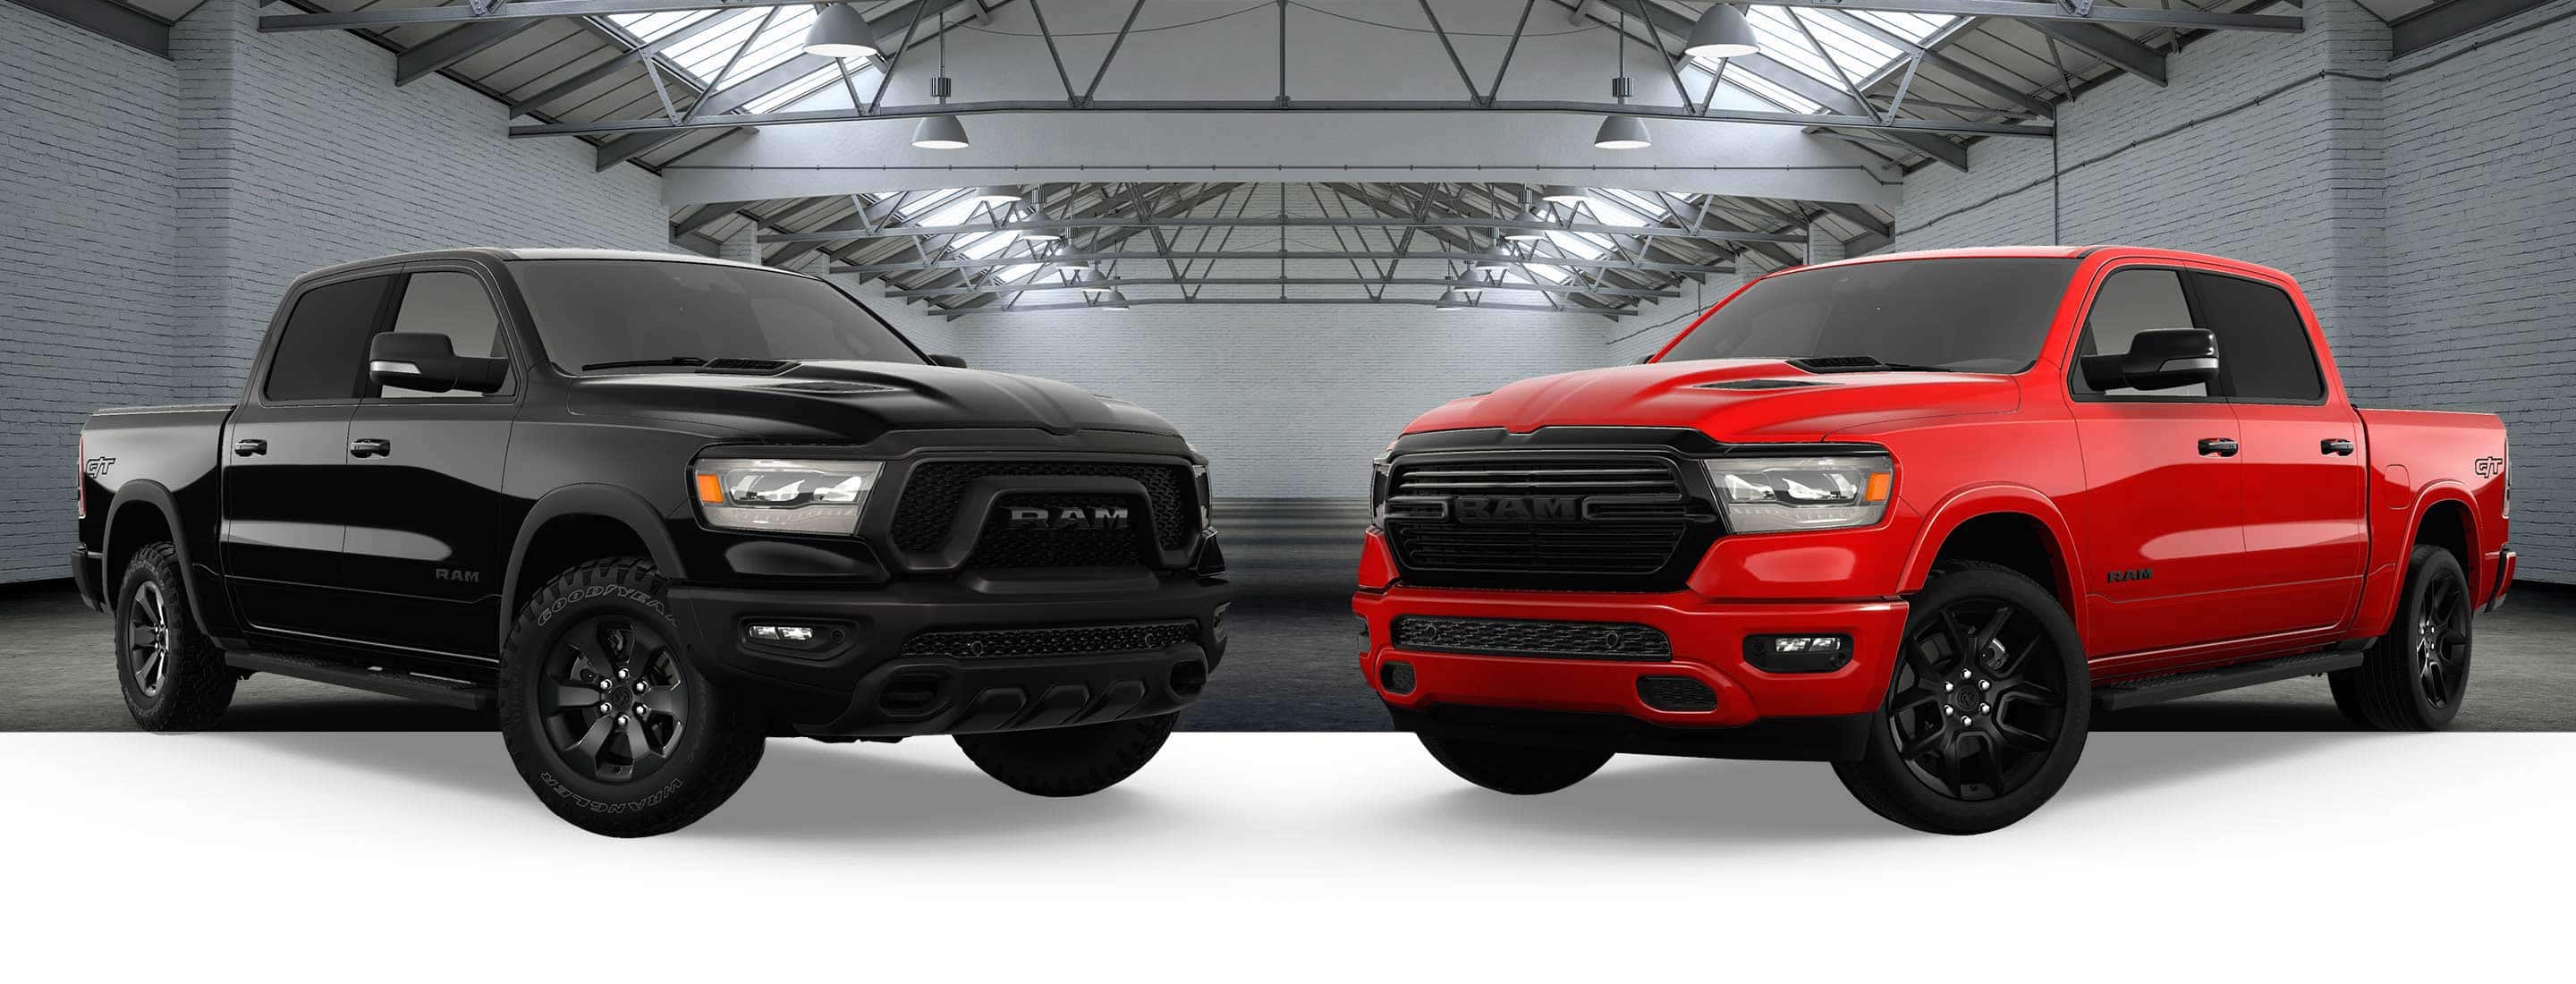 A black 2023 Ram 1500 Rebel G/T Crew Cab and a red 2023 Ram 1500 Laramie G/T Crew Cab with the backdrop of a large exhibition space.